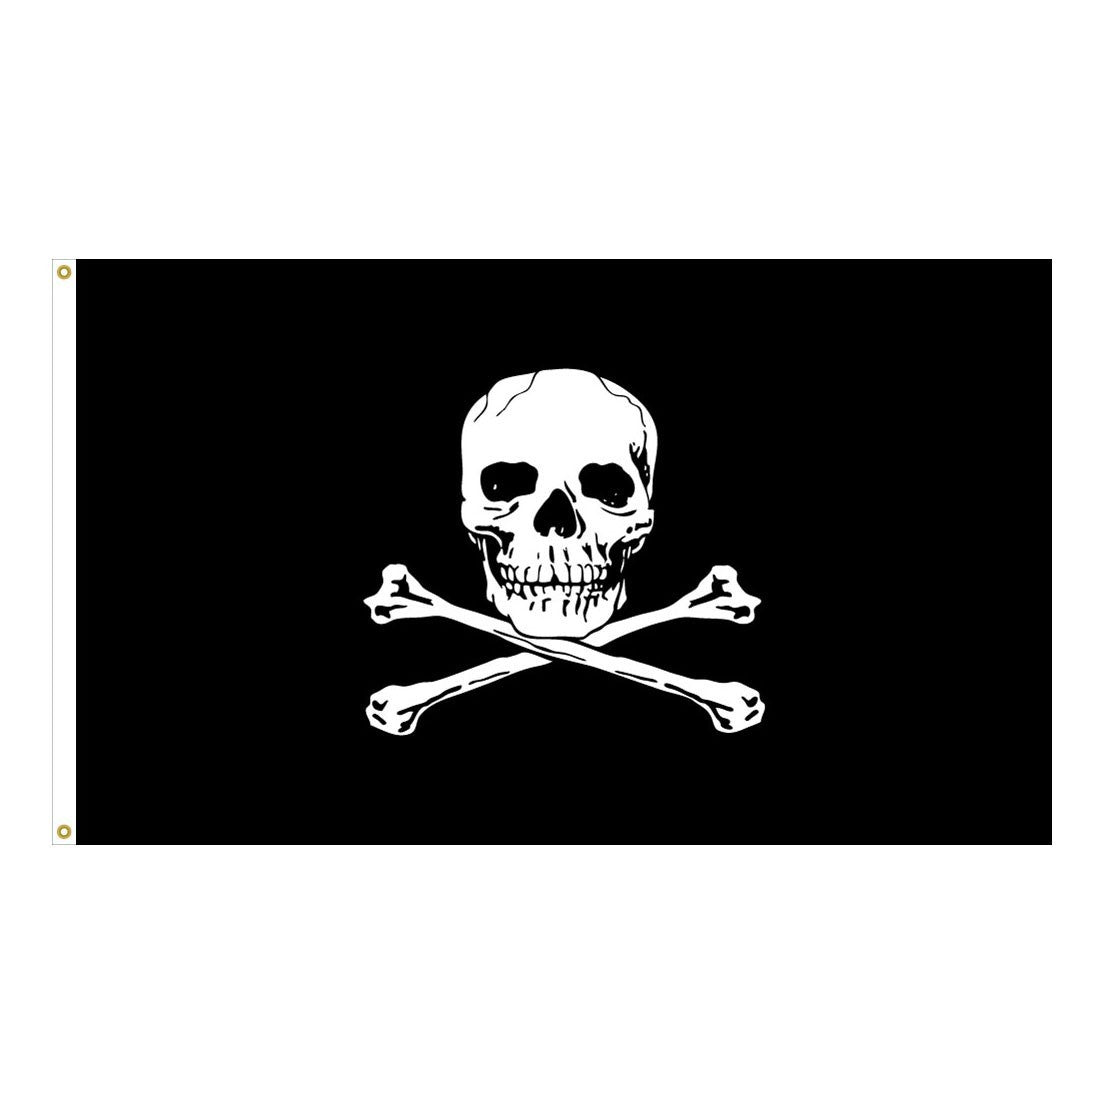 Jolly roger pirate flags for sale